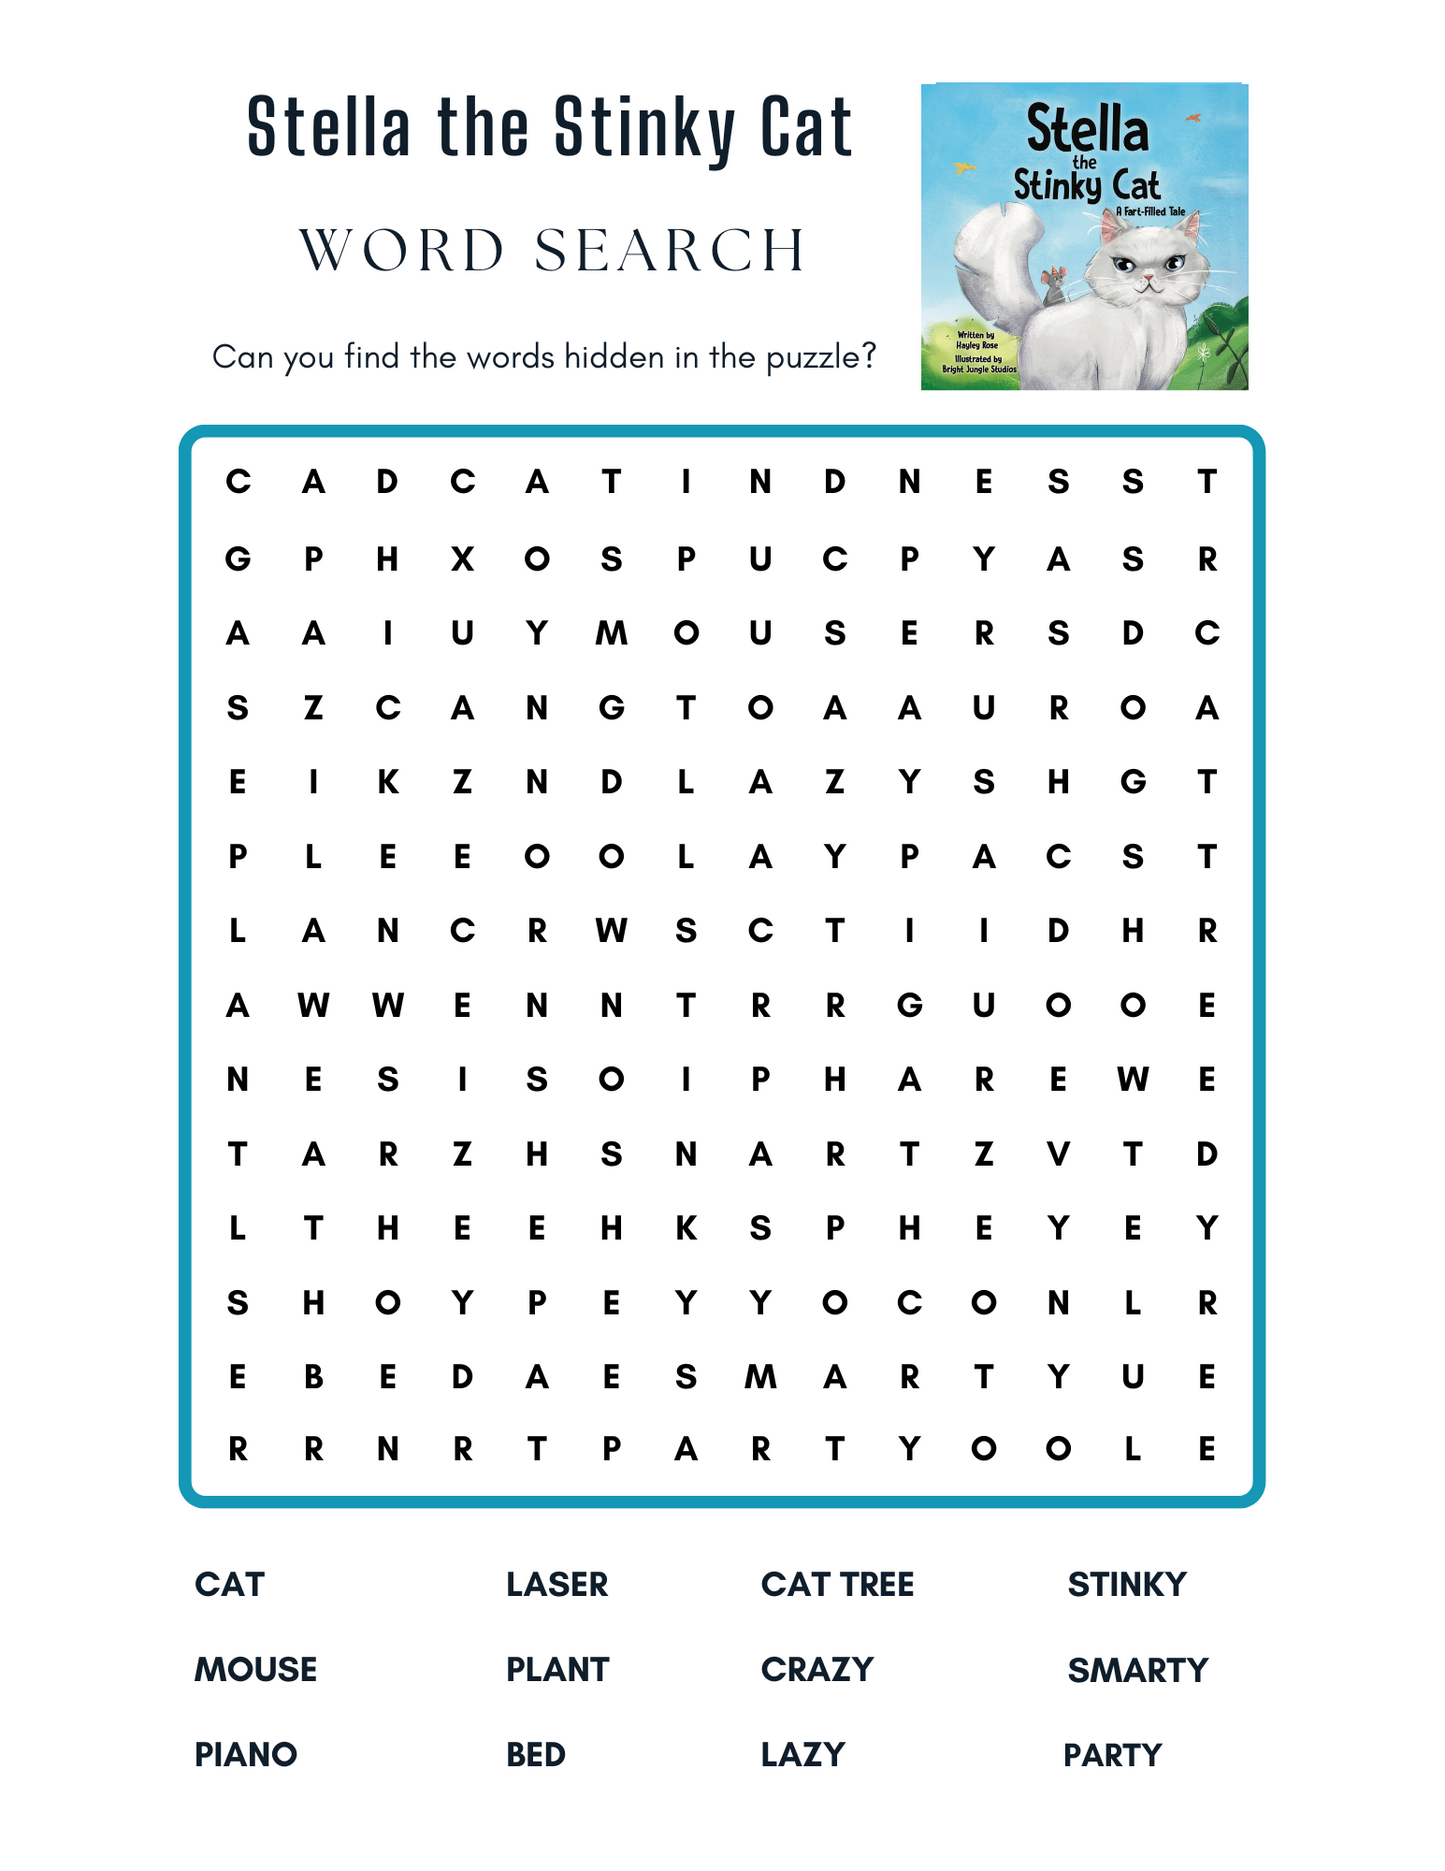 S - Stella the Stinky Cat - Word Search